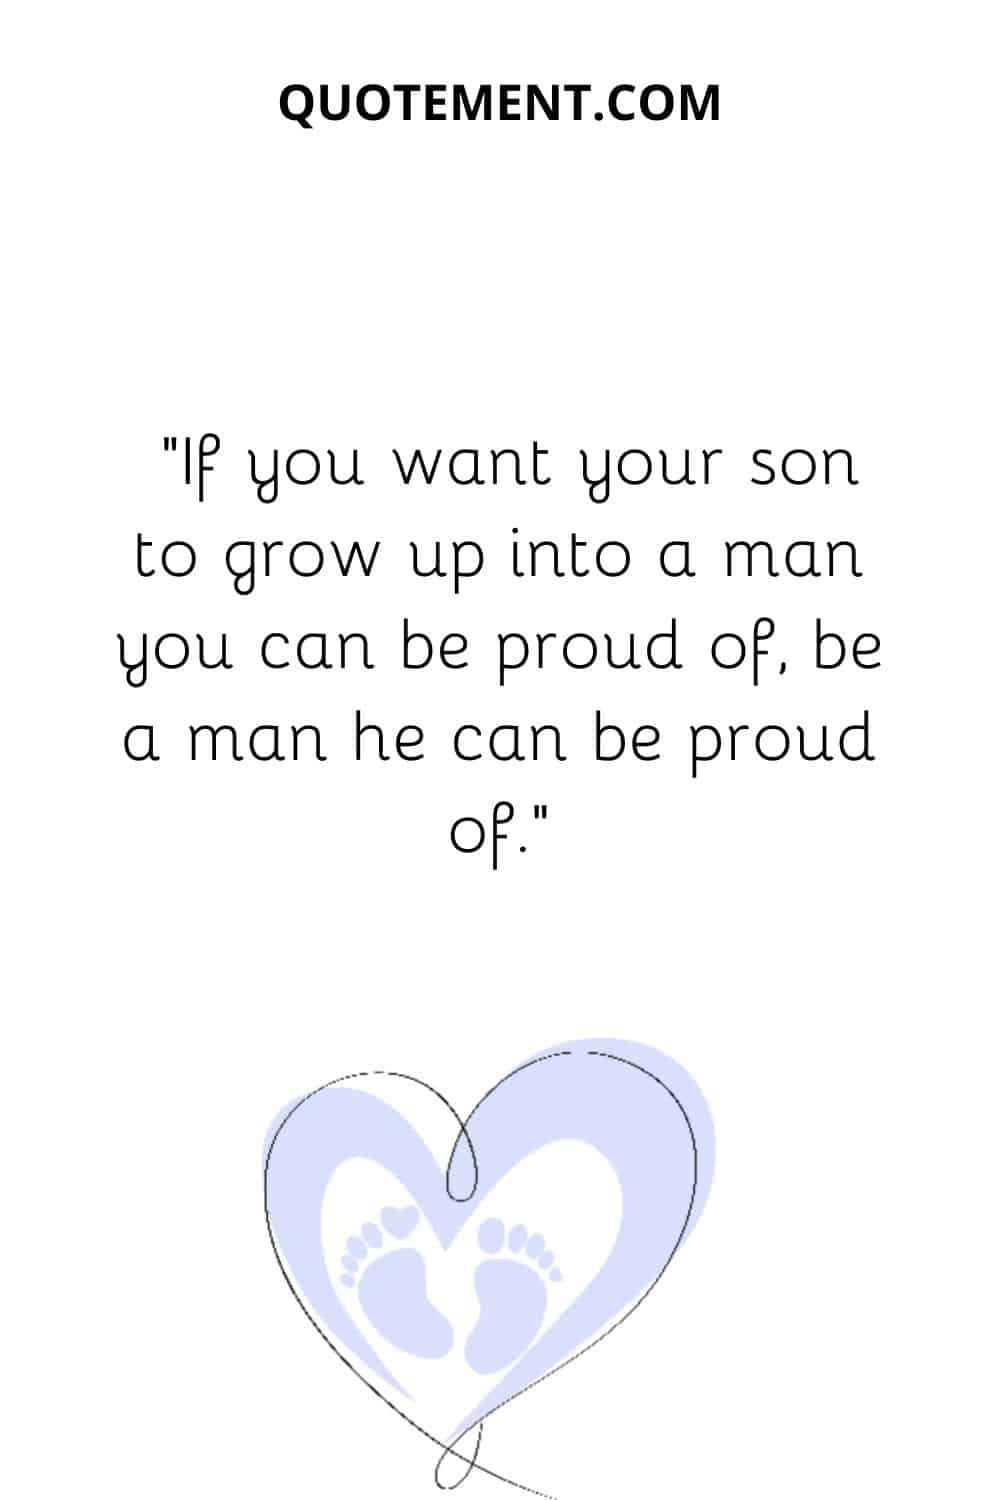 If you want your son to grow up into a man you can be proud of, be a man he can be proud of